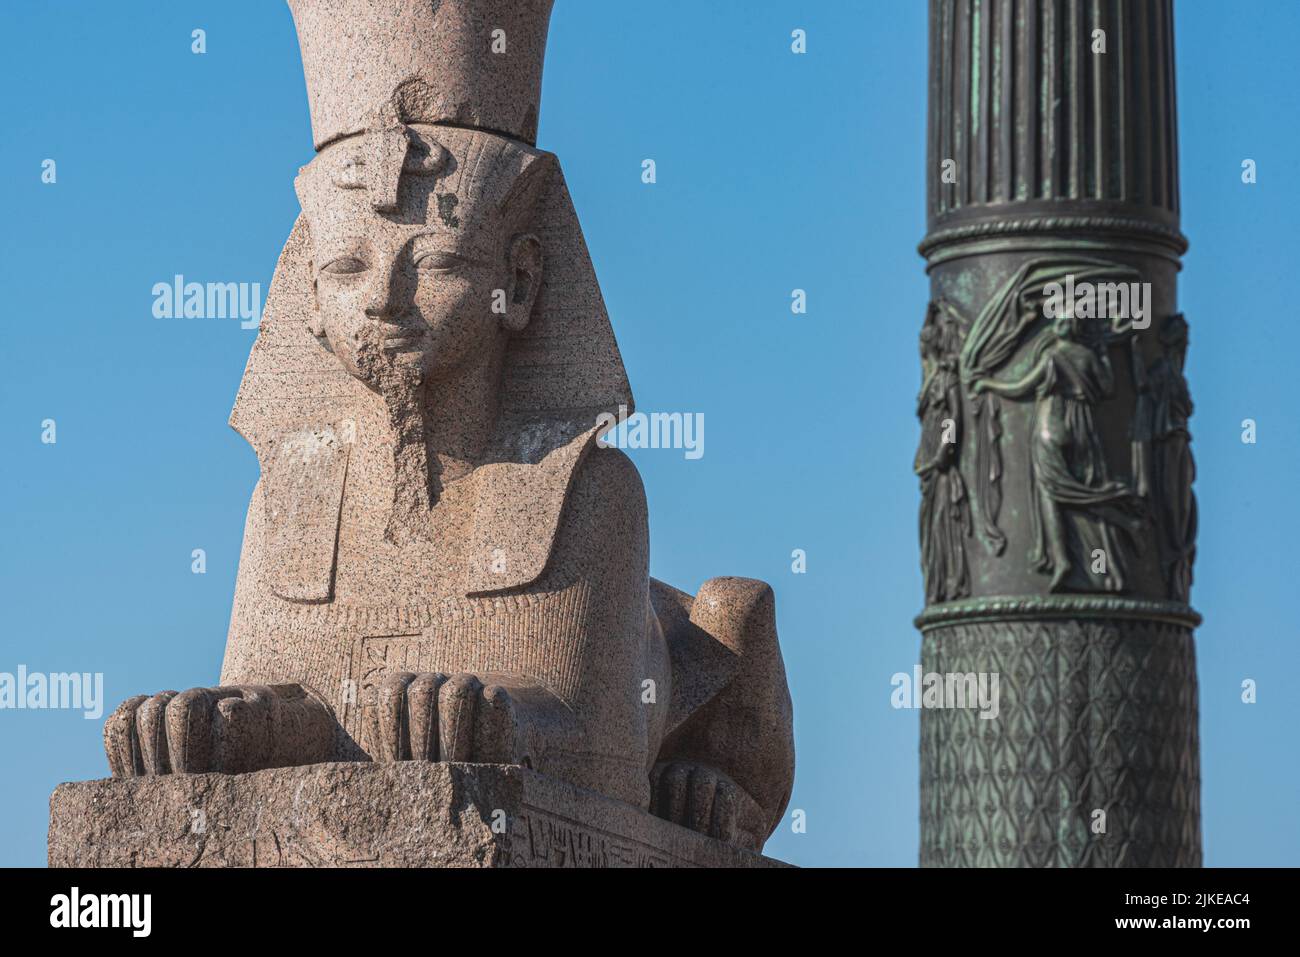 Sphinx in Universitetskaya Embankment, one of two. An ancient Egyption statue, a landmark of St. Petersburg, Russia. Stock Photo